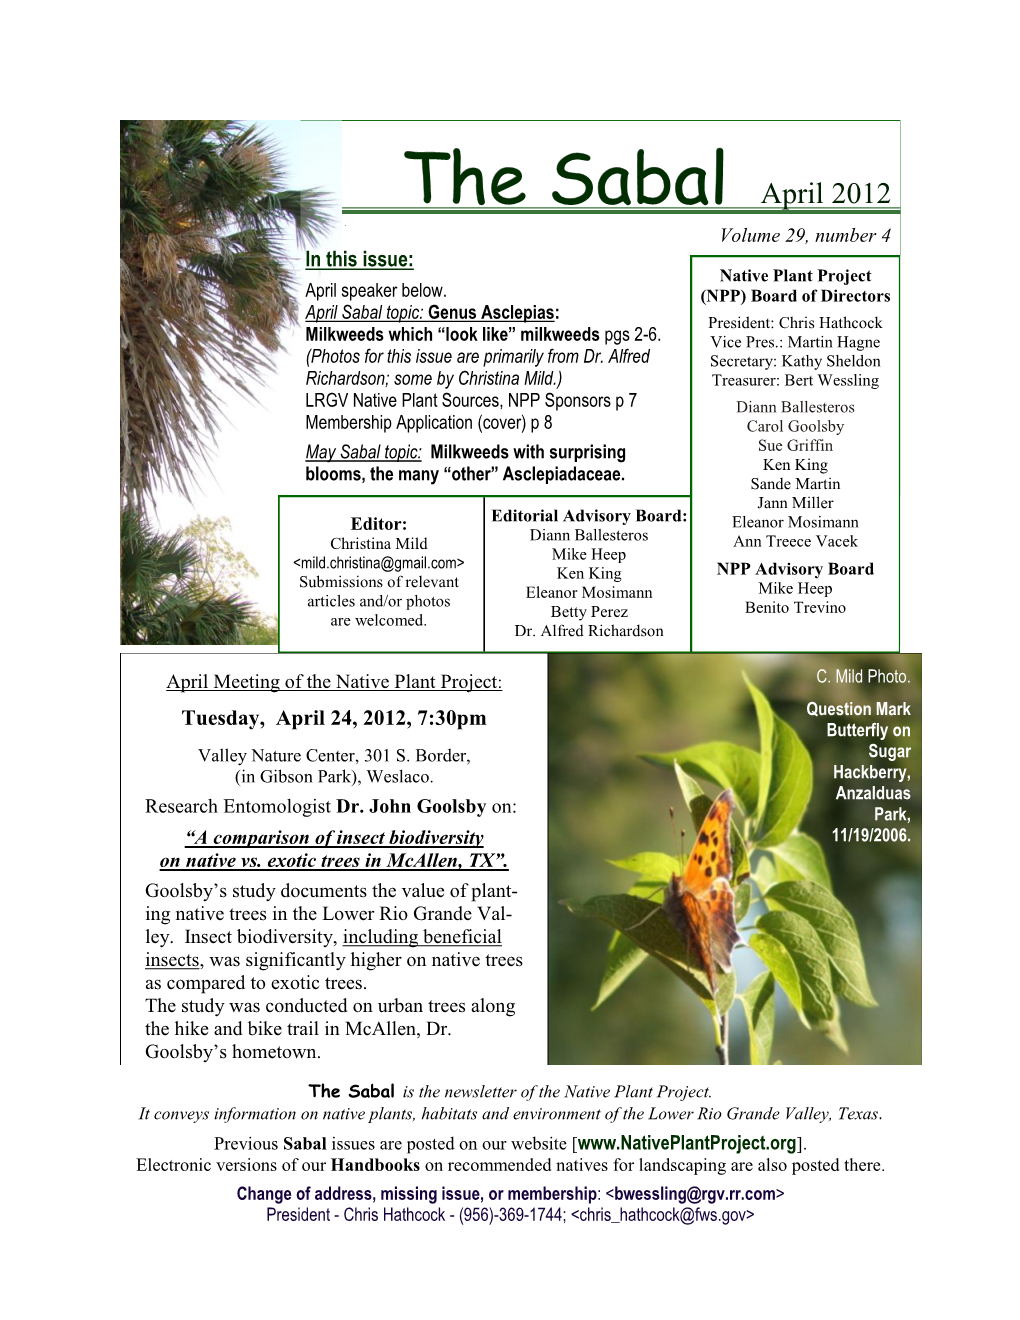 The Sabal April 2012 Volume 29, Number 4 in This Issue: Native Plant Project April Speaker Below